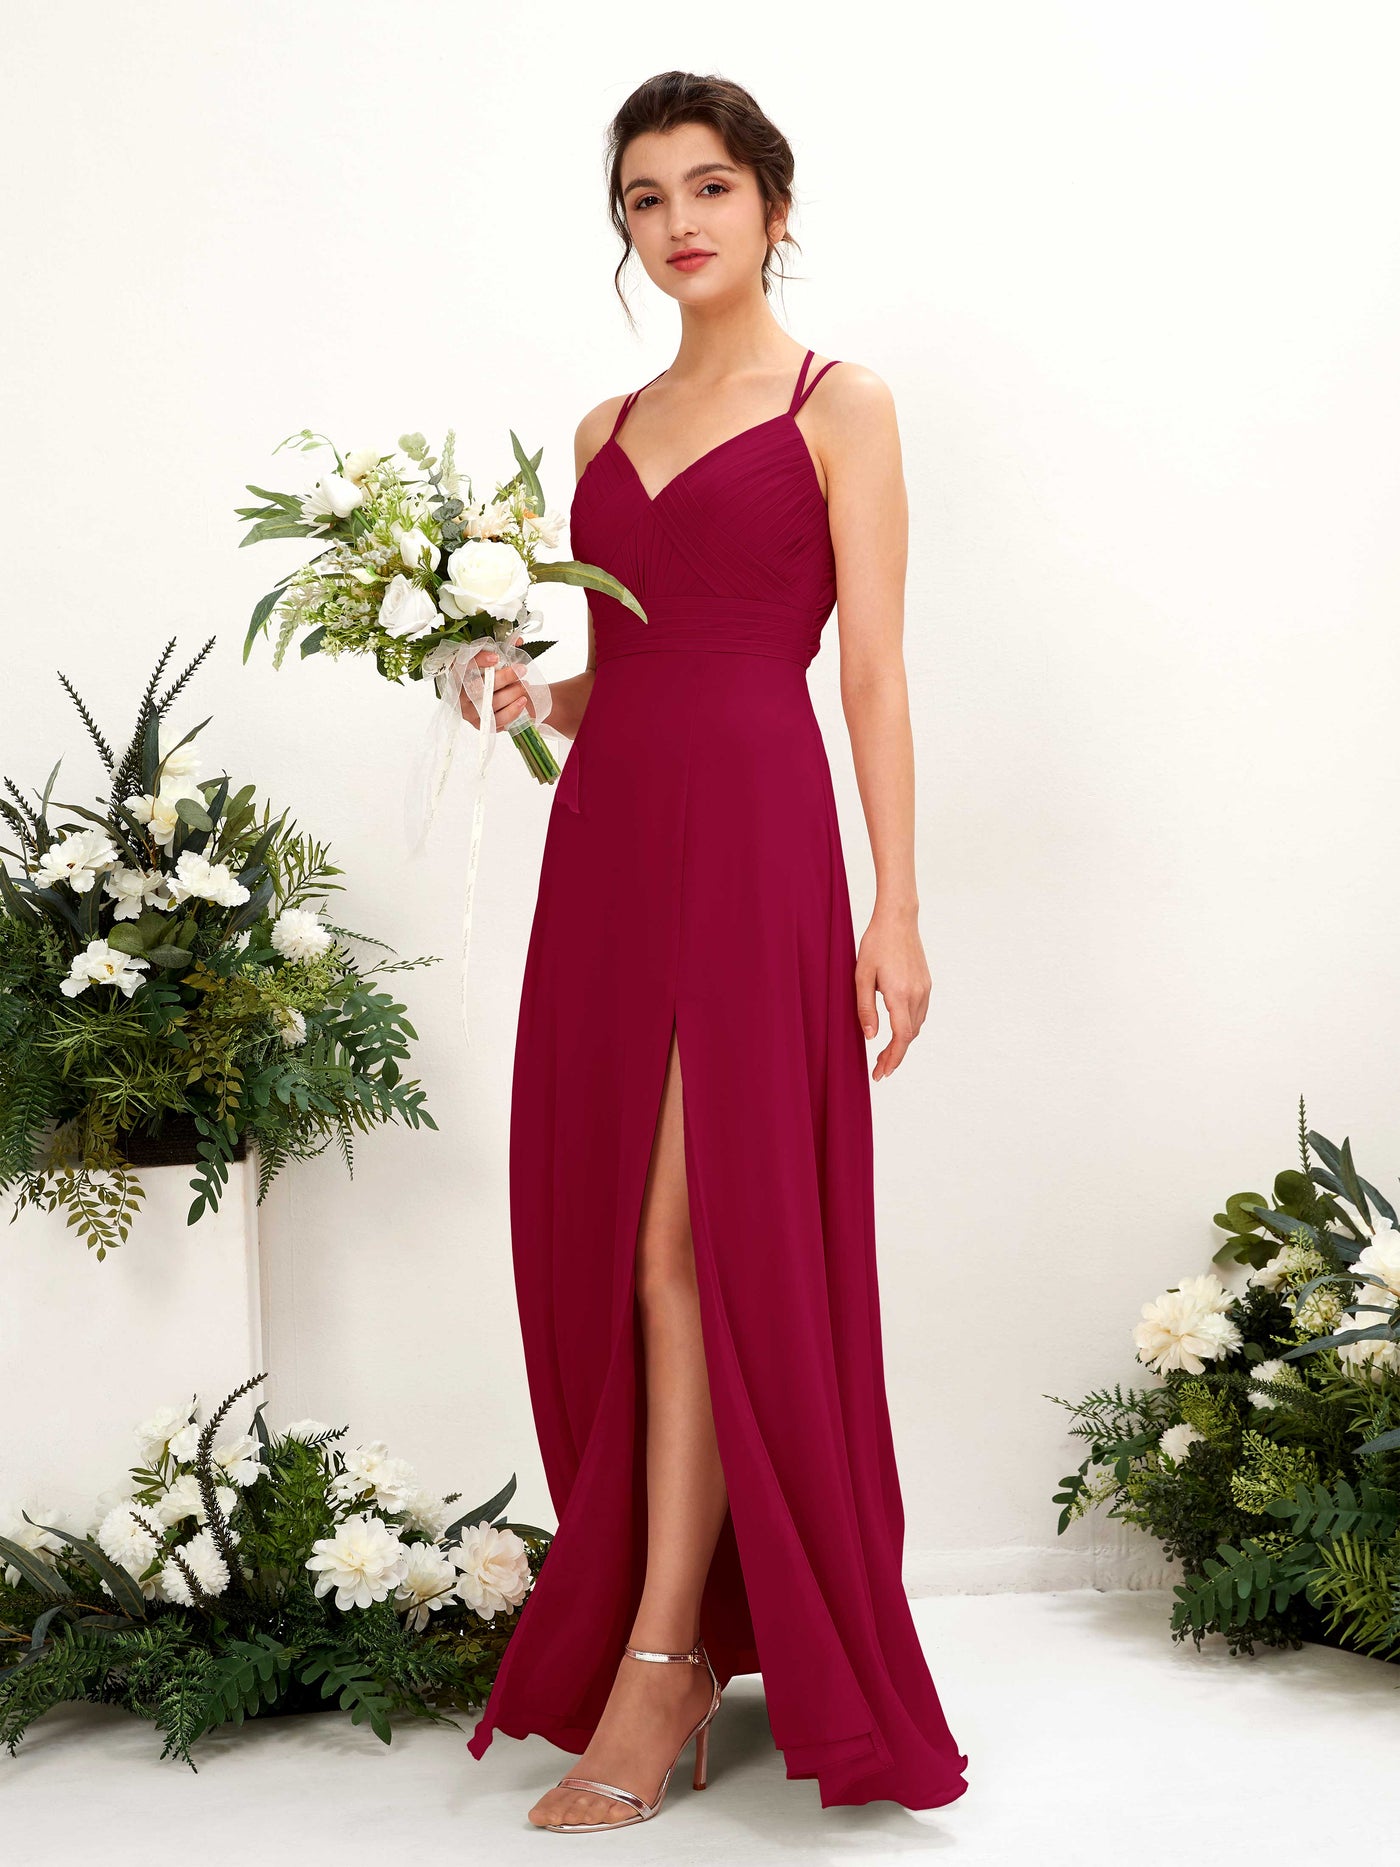 Jester Red Bridesmaid Dresses Bridesmaid Dress A-line Chiffon Spaghetti-straps Full Length Sleeveless Wedding Party Dress (81225441)#color_jester-red